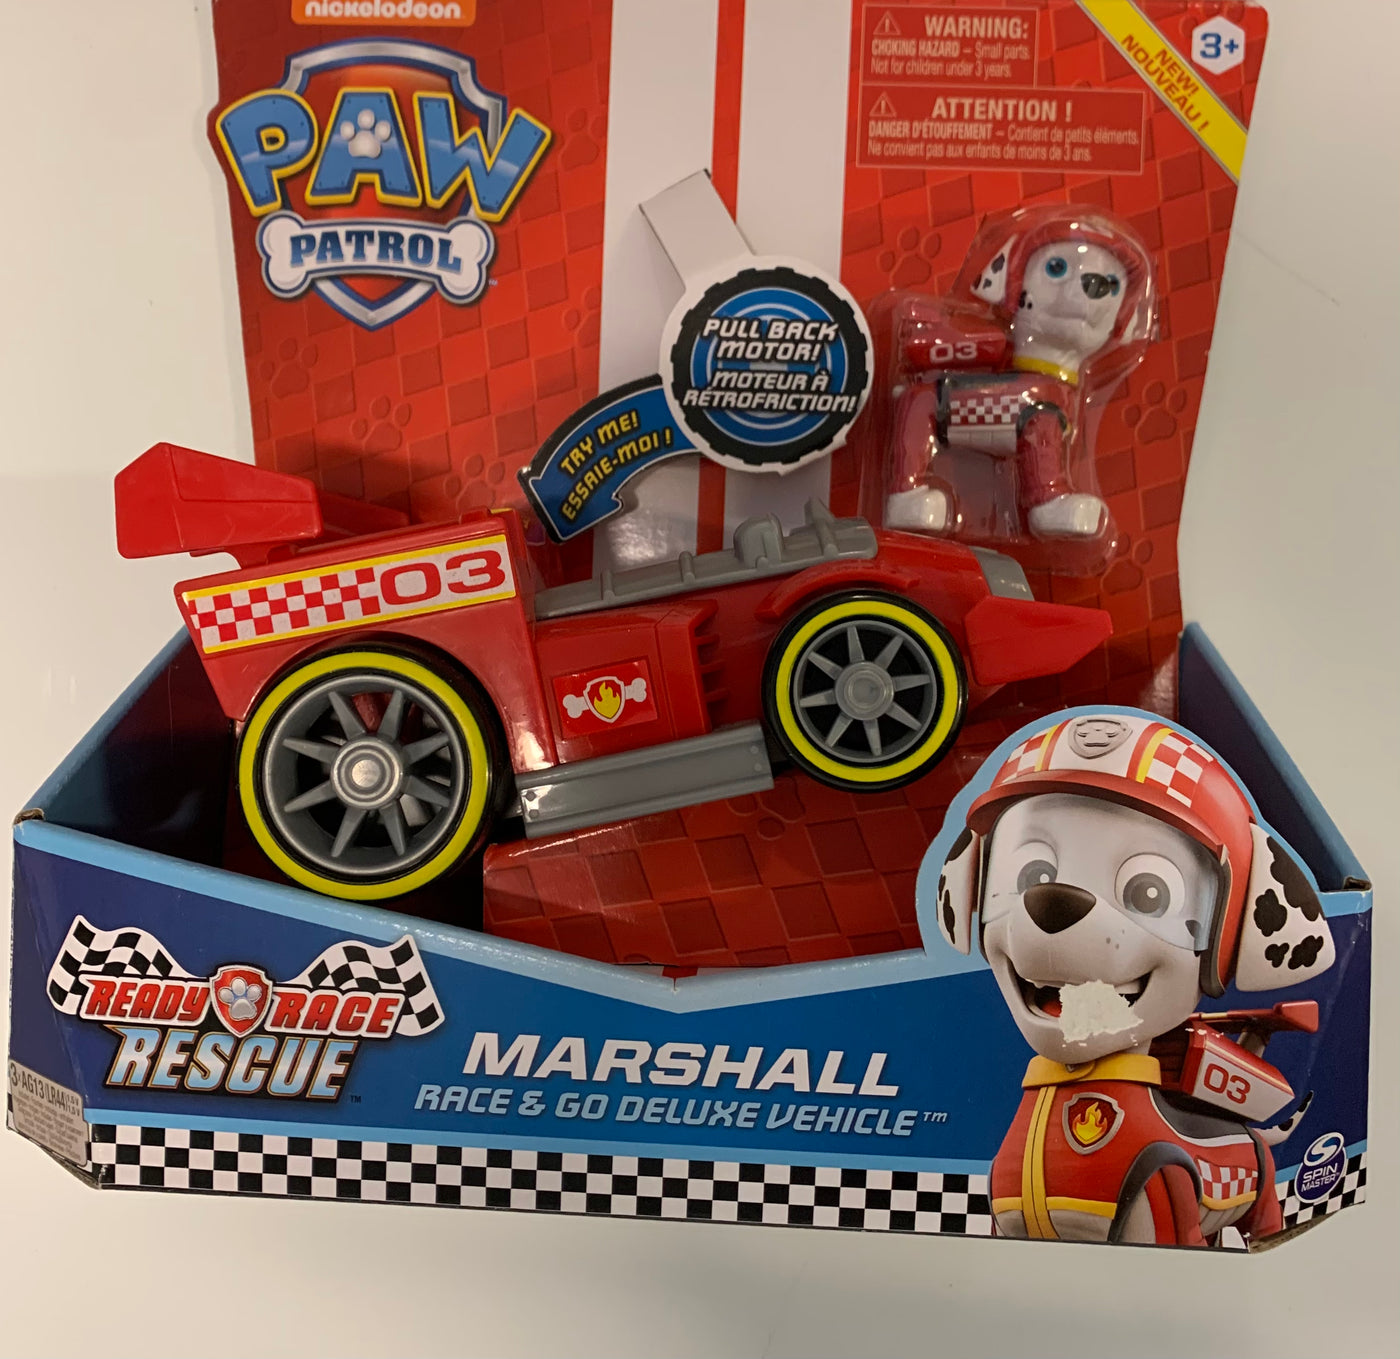 Paw Patrol Race And Go DeLuxe Vehicle